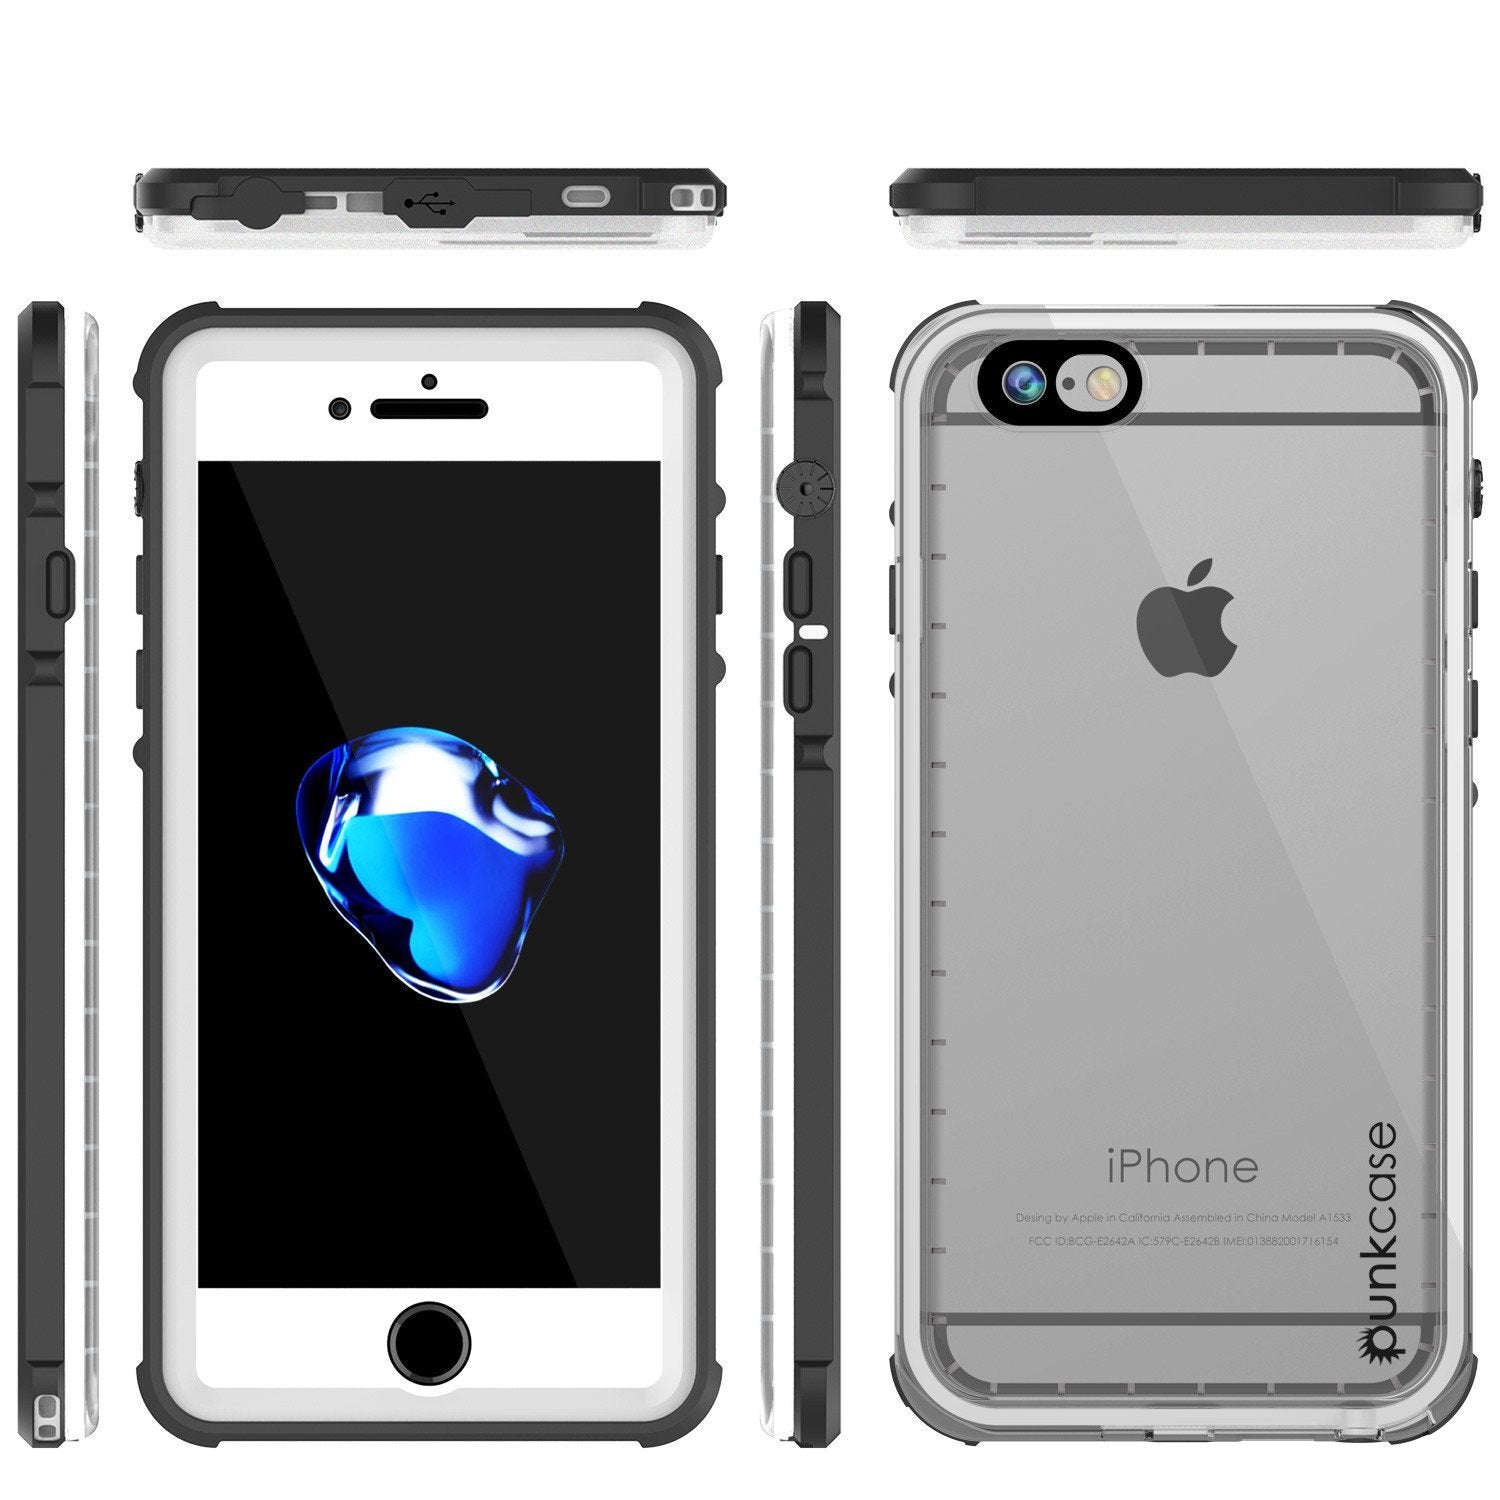 Apple iPhone 8 Waterproof Case, PUNKcase CRYSTAL White W/ Attached Screen Protector  | Warranty